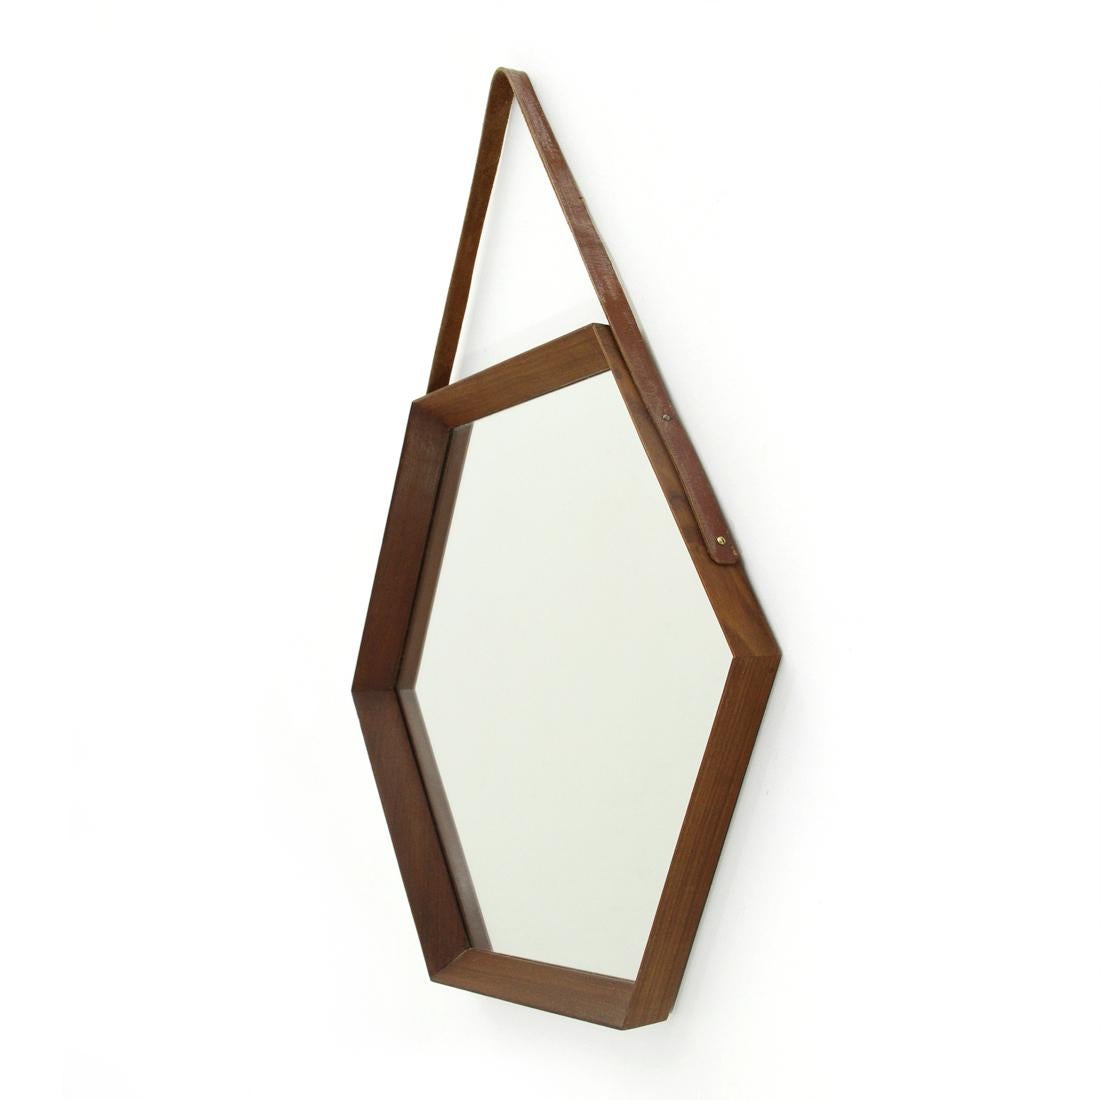 Italian manufacturing mirror produced in the 1960s.
Hexagonal teak frame.
Leather belt.
Good general conditions, some signs due to normal use over time.

Dimensions: Width 55 cm, depth 3,5 cm, height 48 cm.